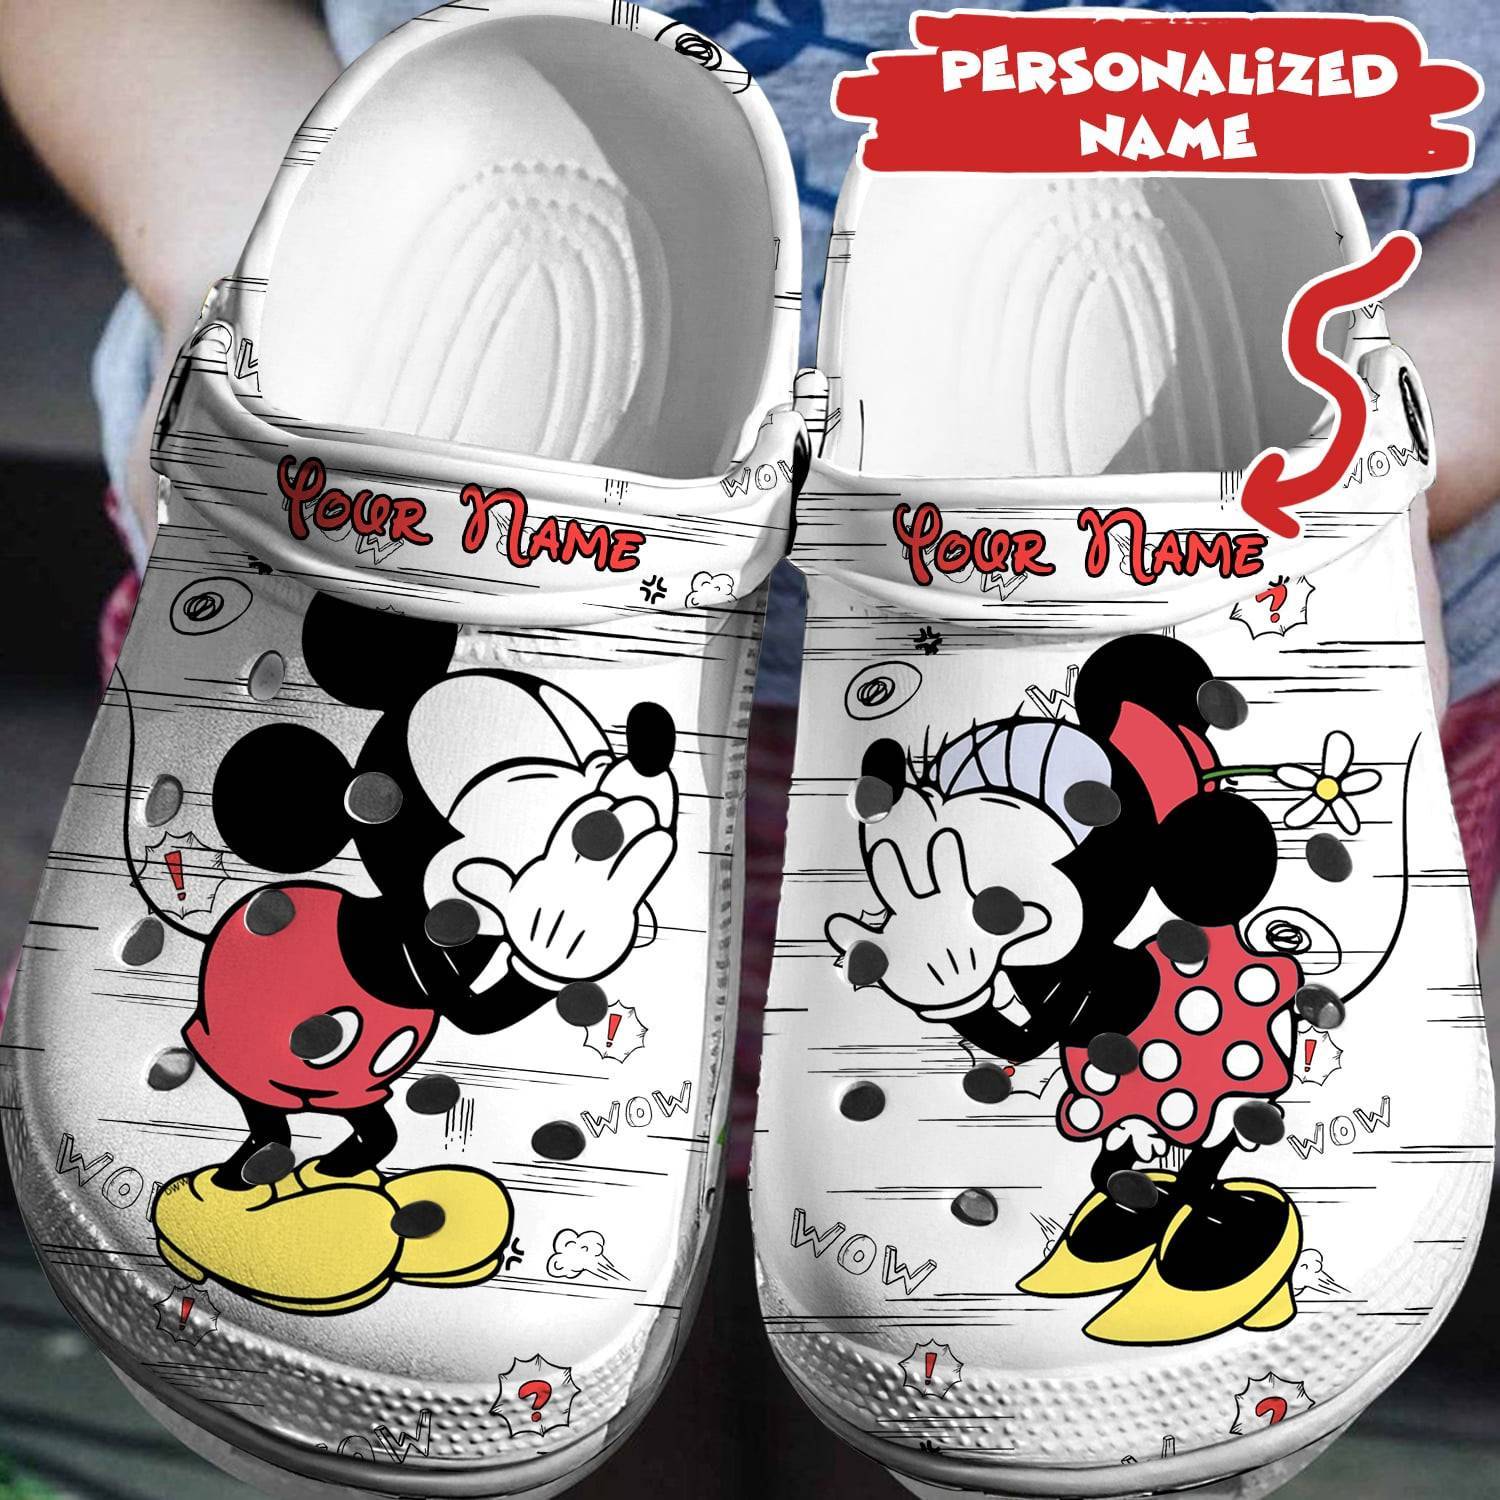 Customize Your Disney Magic: Personalized Mickey Minnie Crocs 3D Clog Shoes